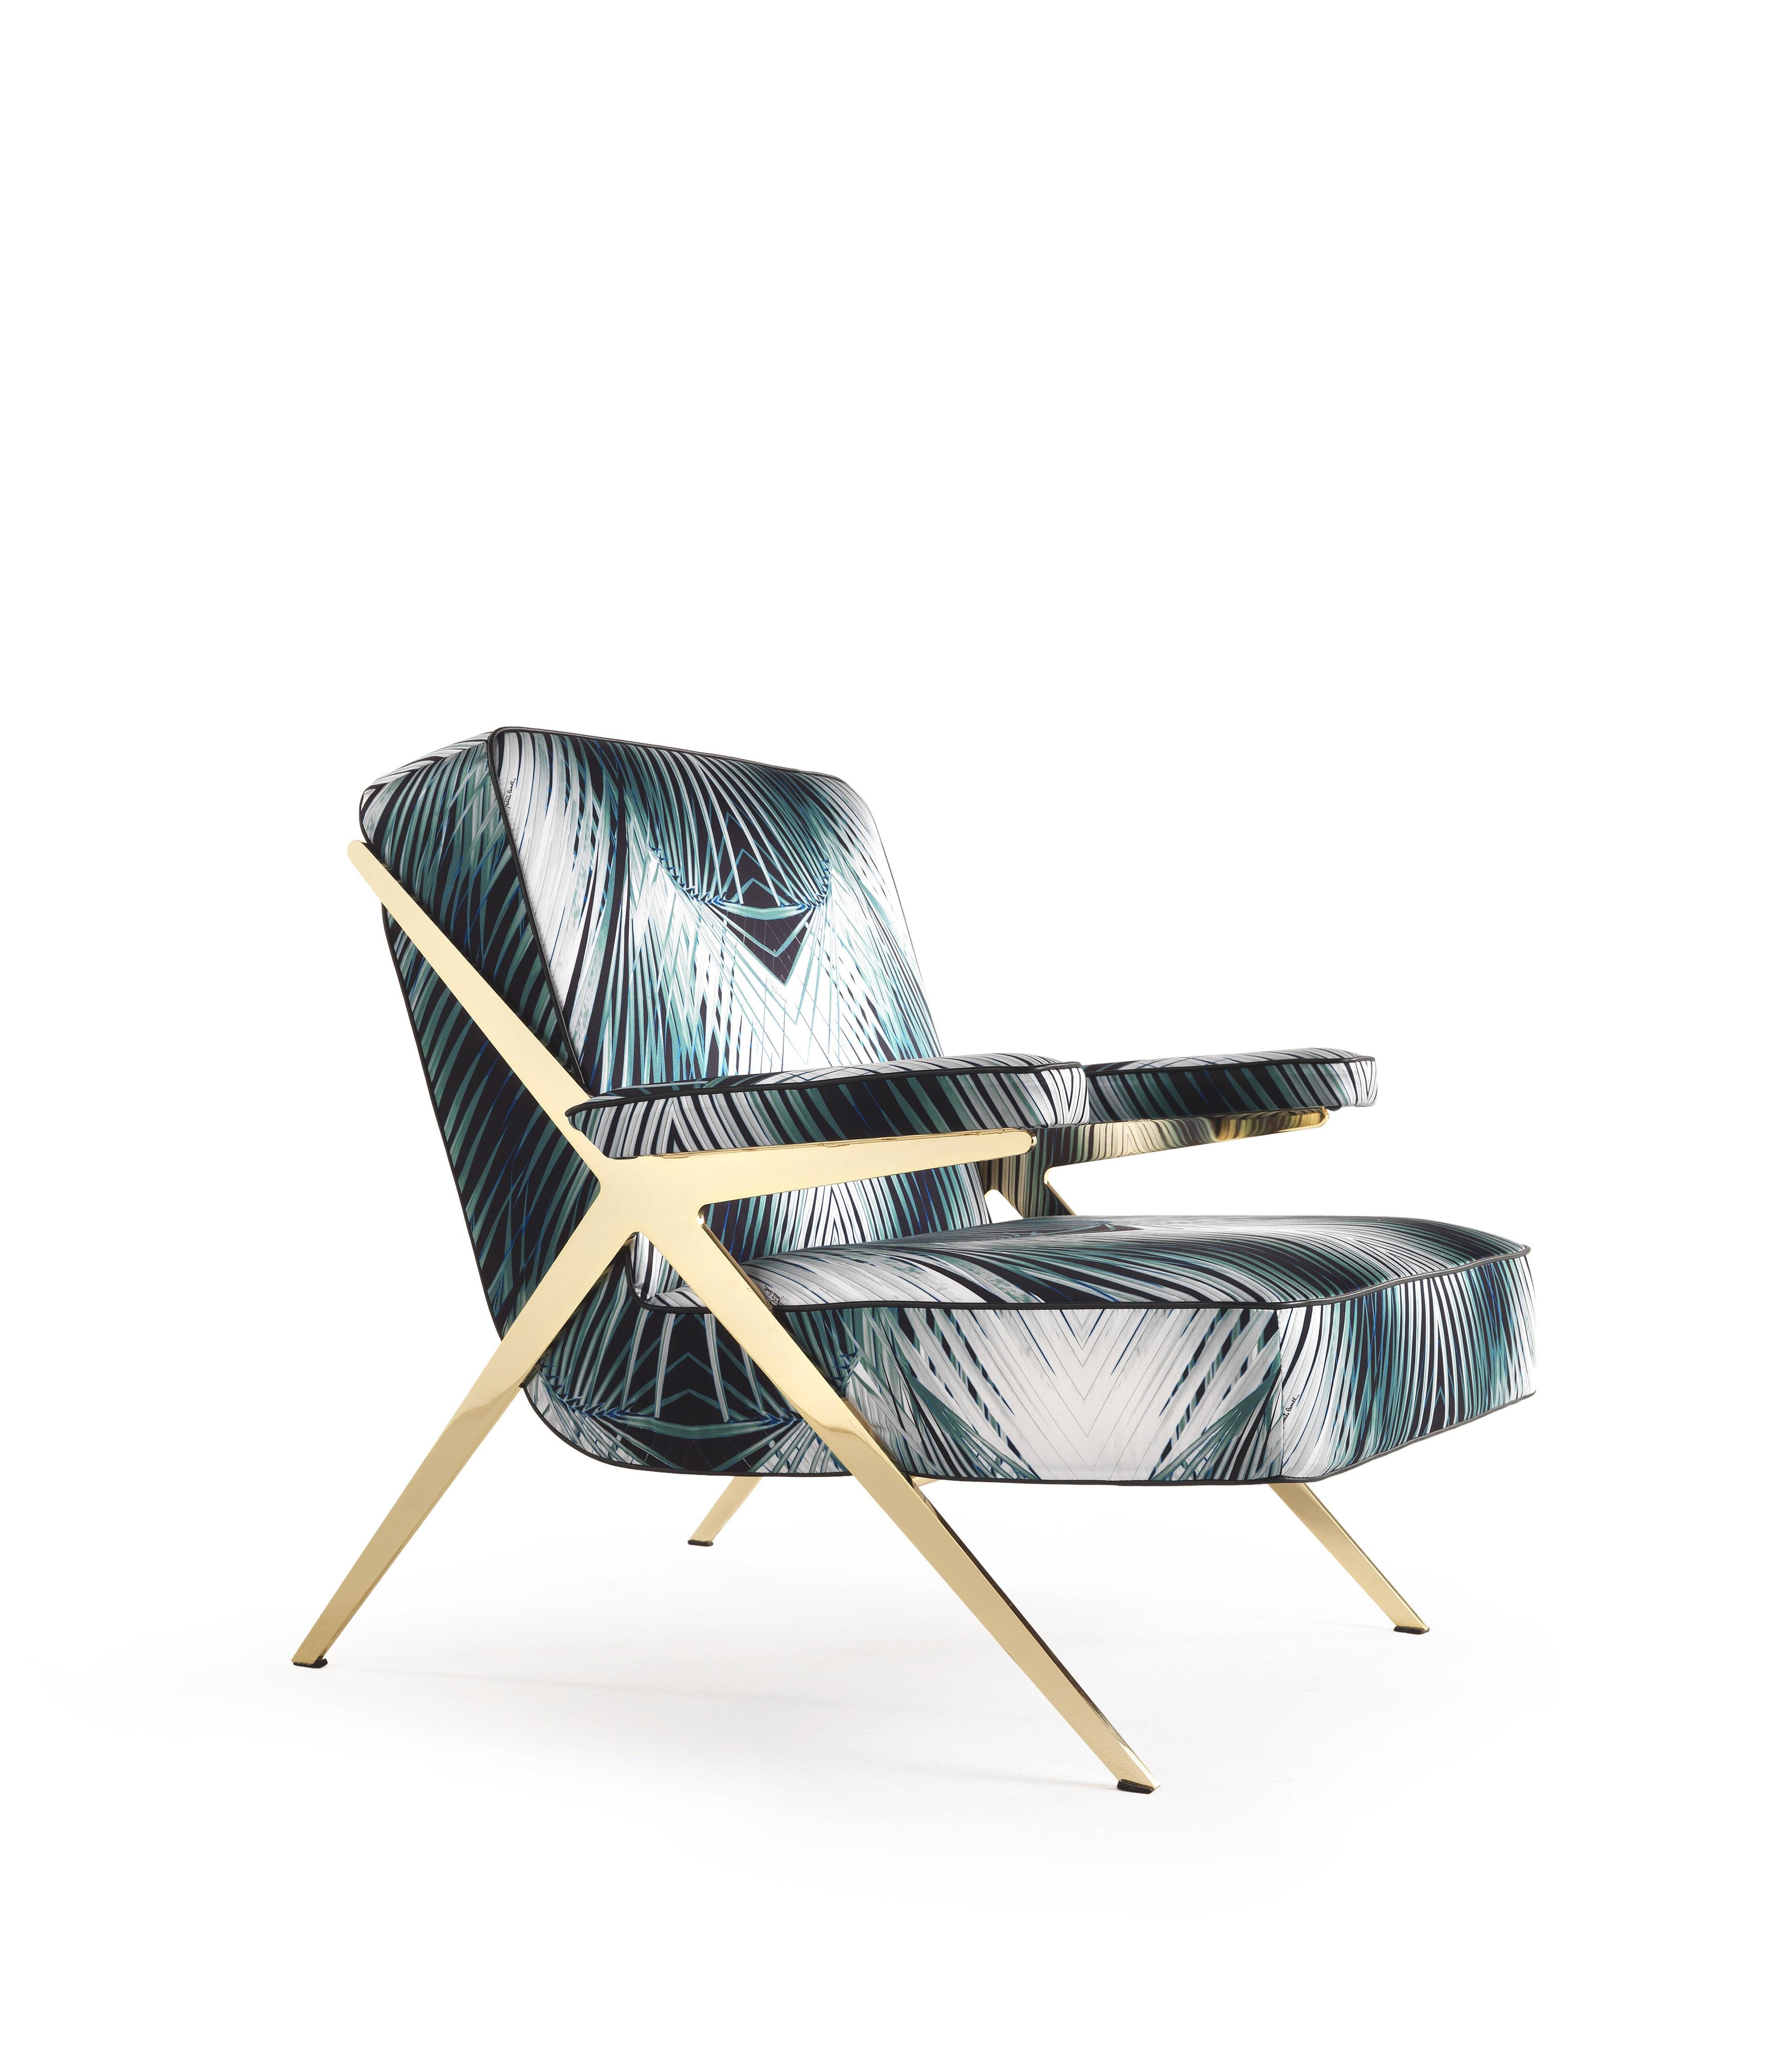 With its irresistible fifties charm revisited in a contemporary key, the Fiji armchair is characterized by the dynamism and essentiality of the lines. Presented this year with the new silk upholstery with banana leaf print, the Fiji armchair becomes